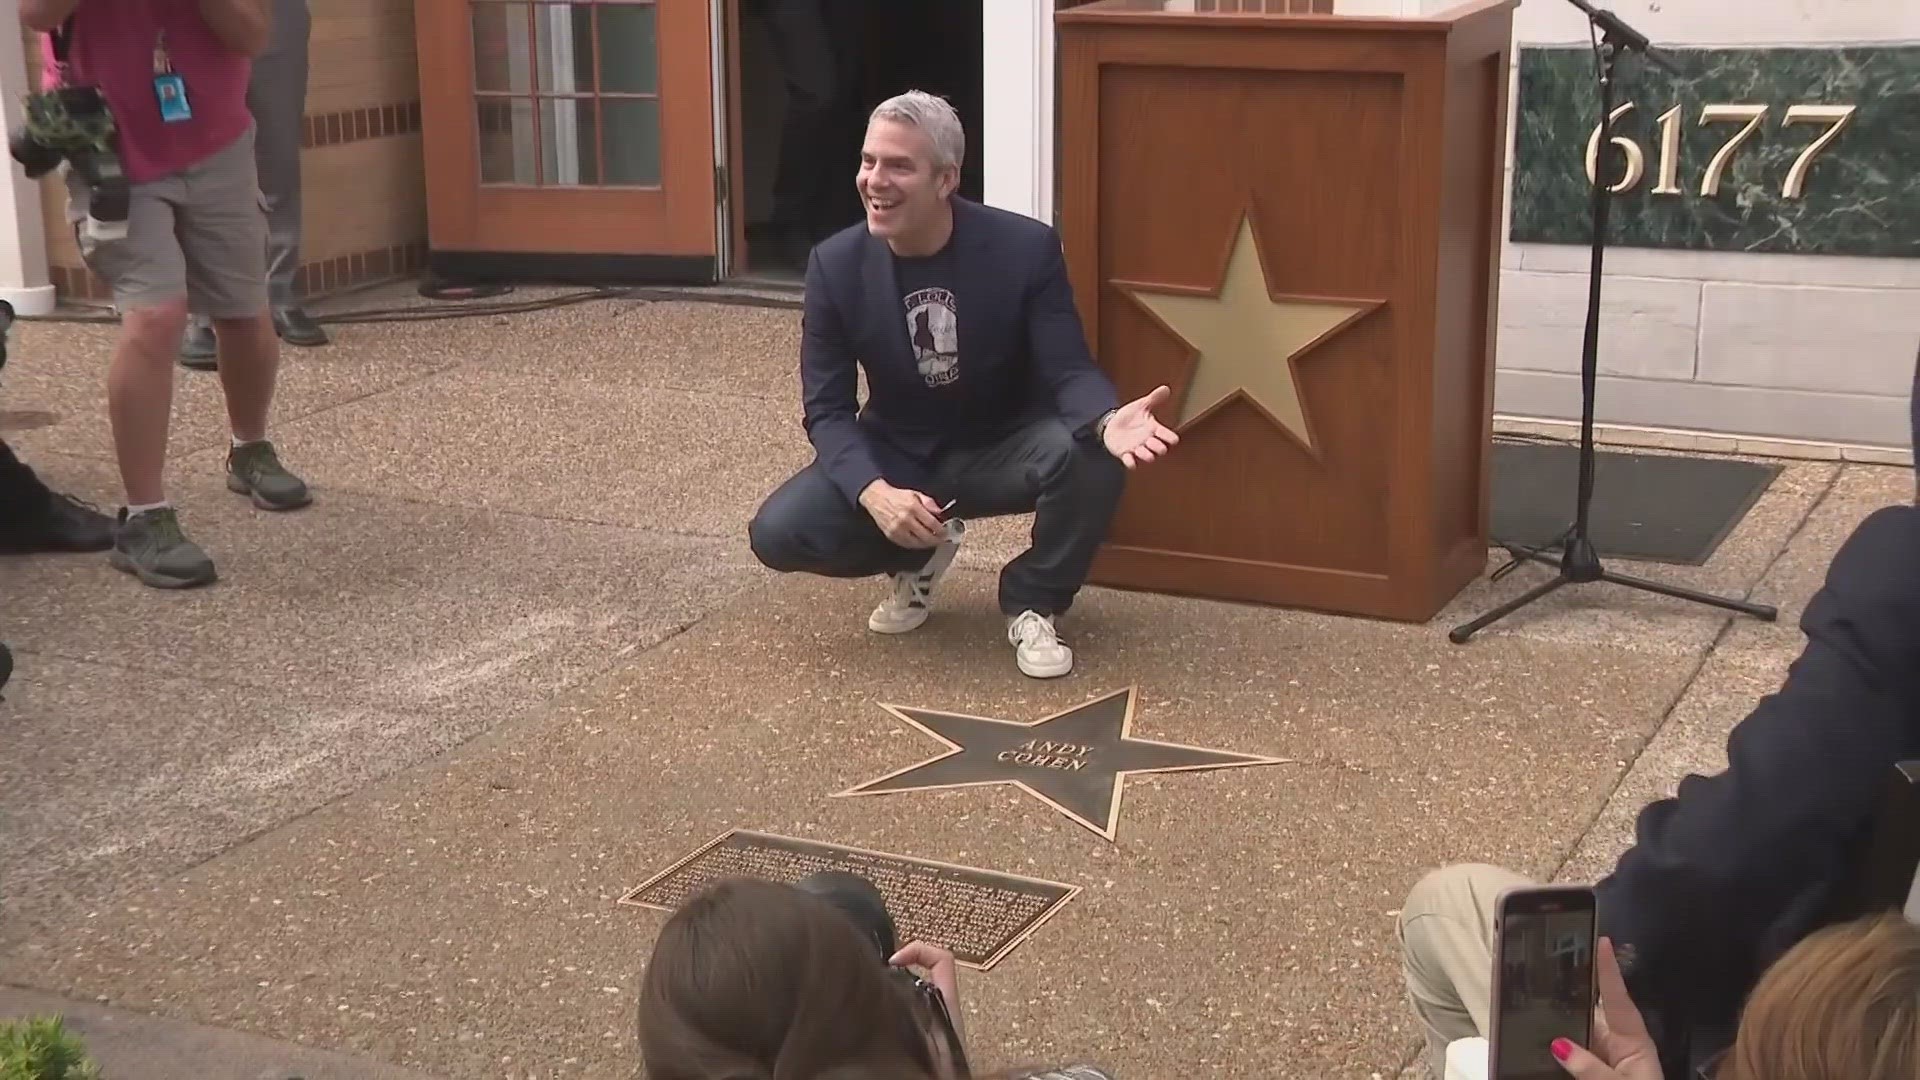 Andy Cohen, the host of Bravo's "What What Happens Live," was inducted Friday night into the St. Louis Walk of Fame.